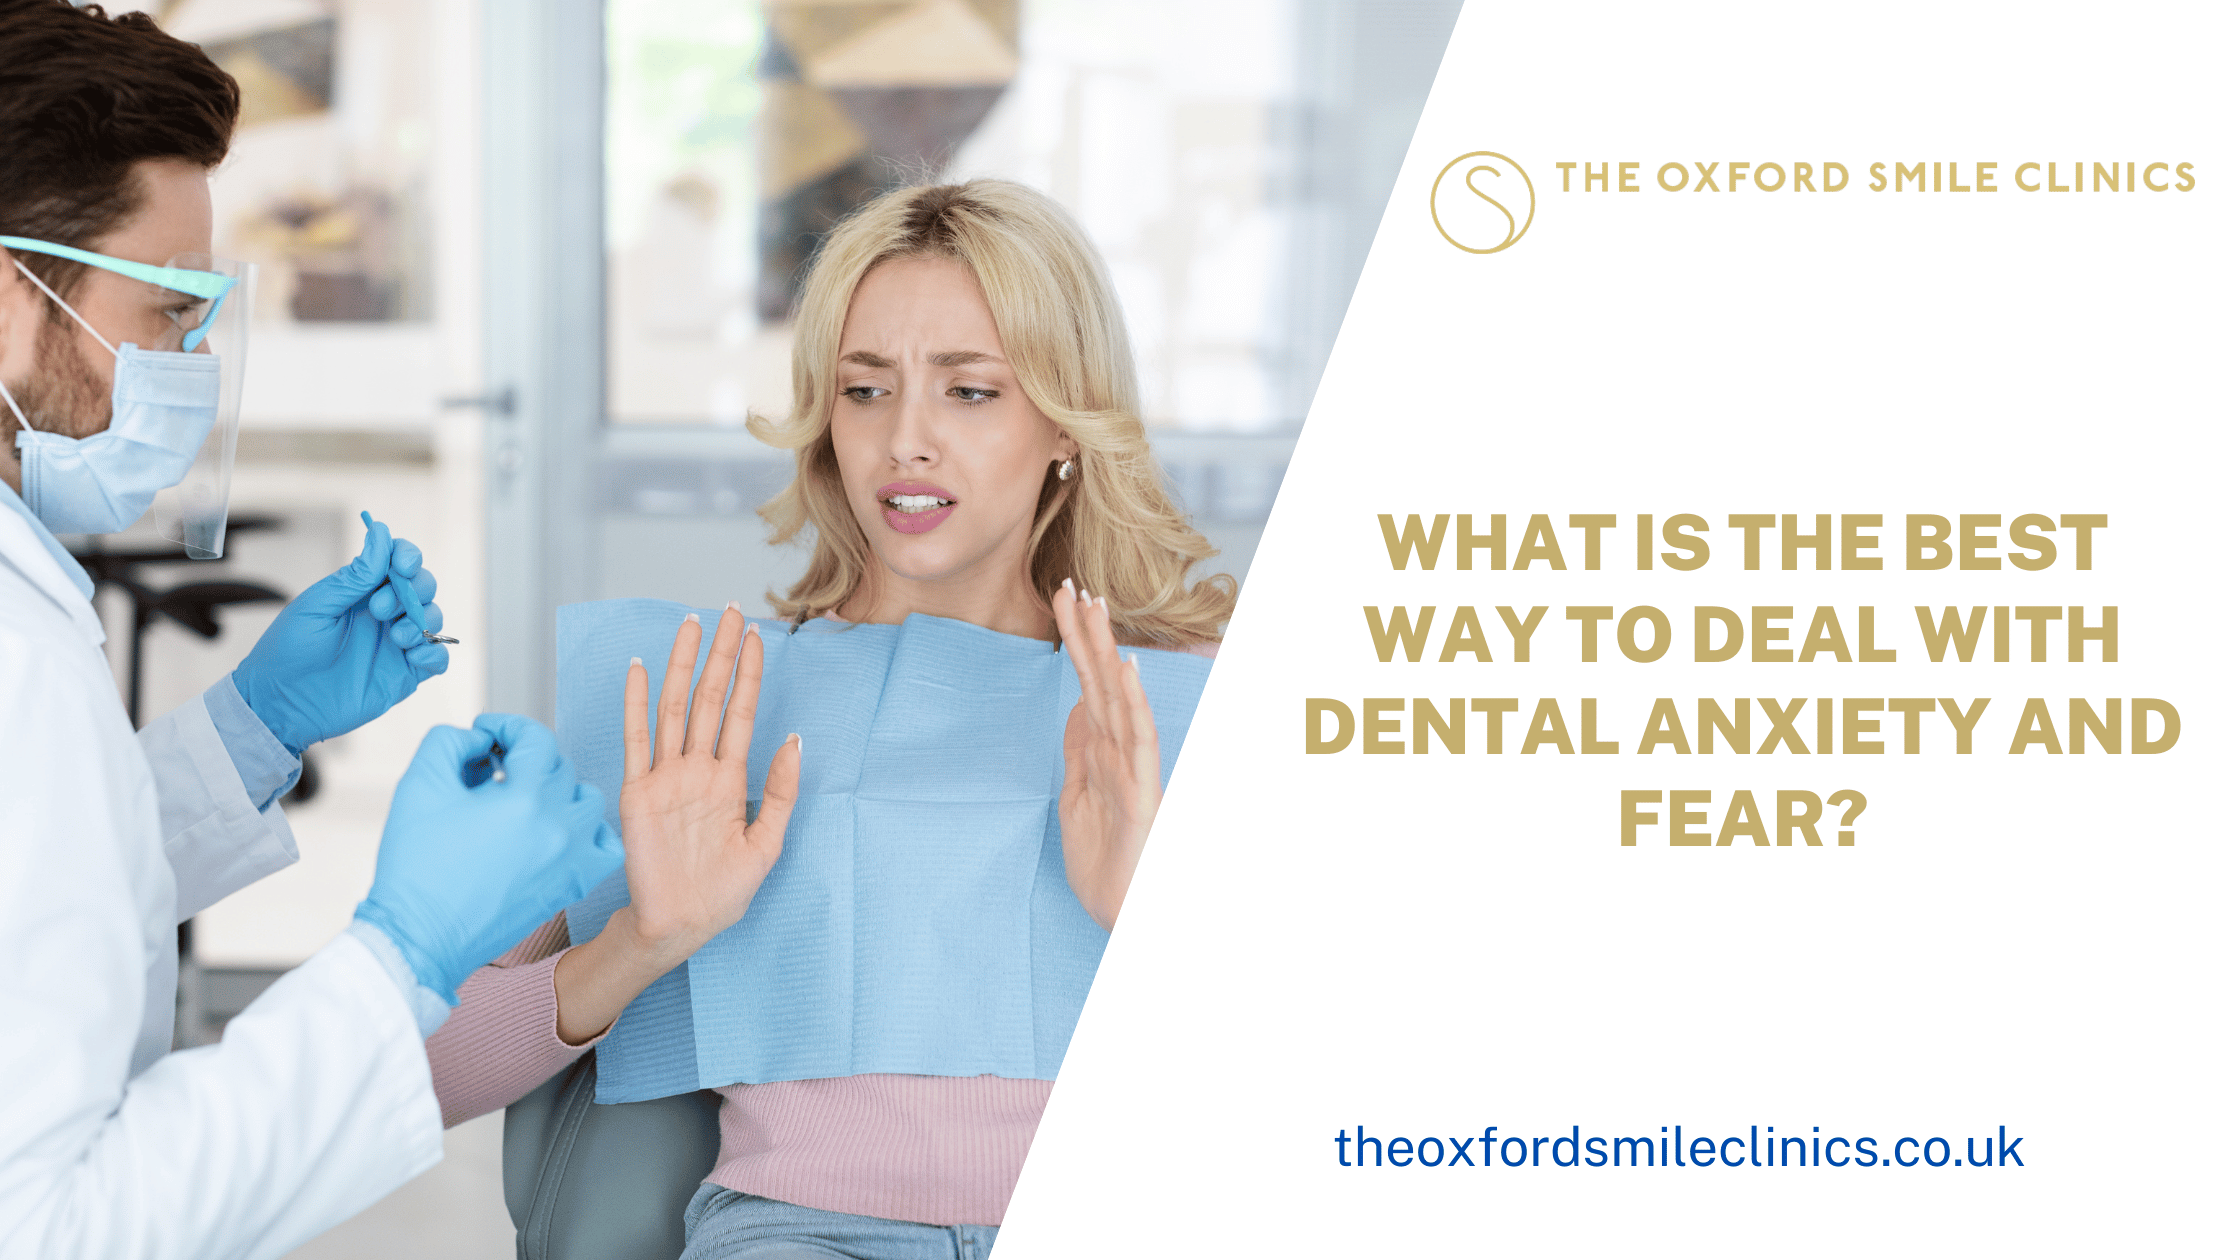 What Is The Best Way To Deal With Dental Anxiety And Fear?